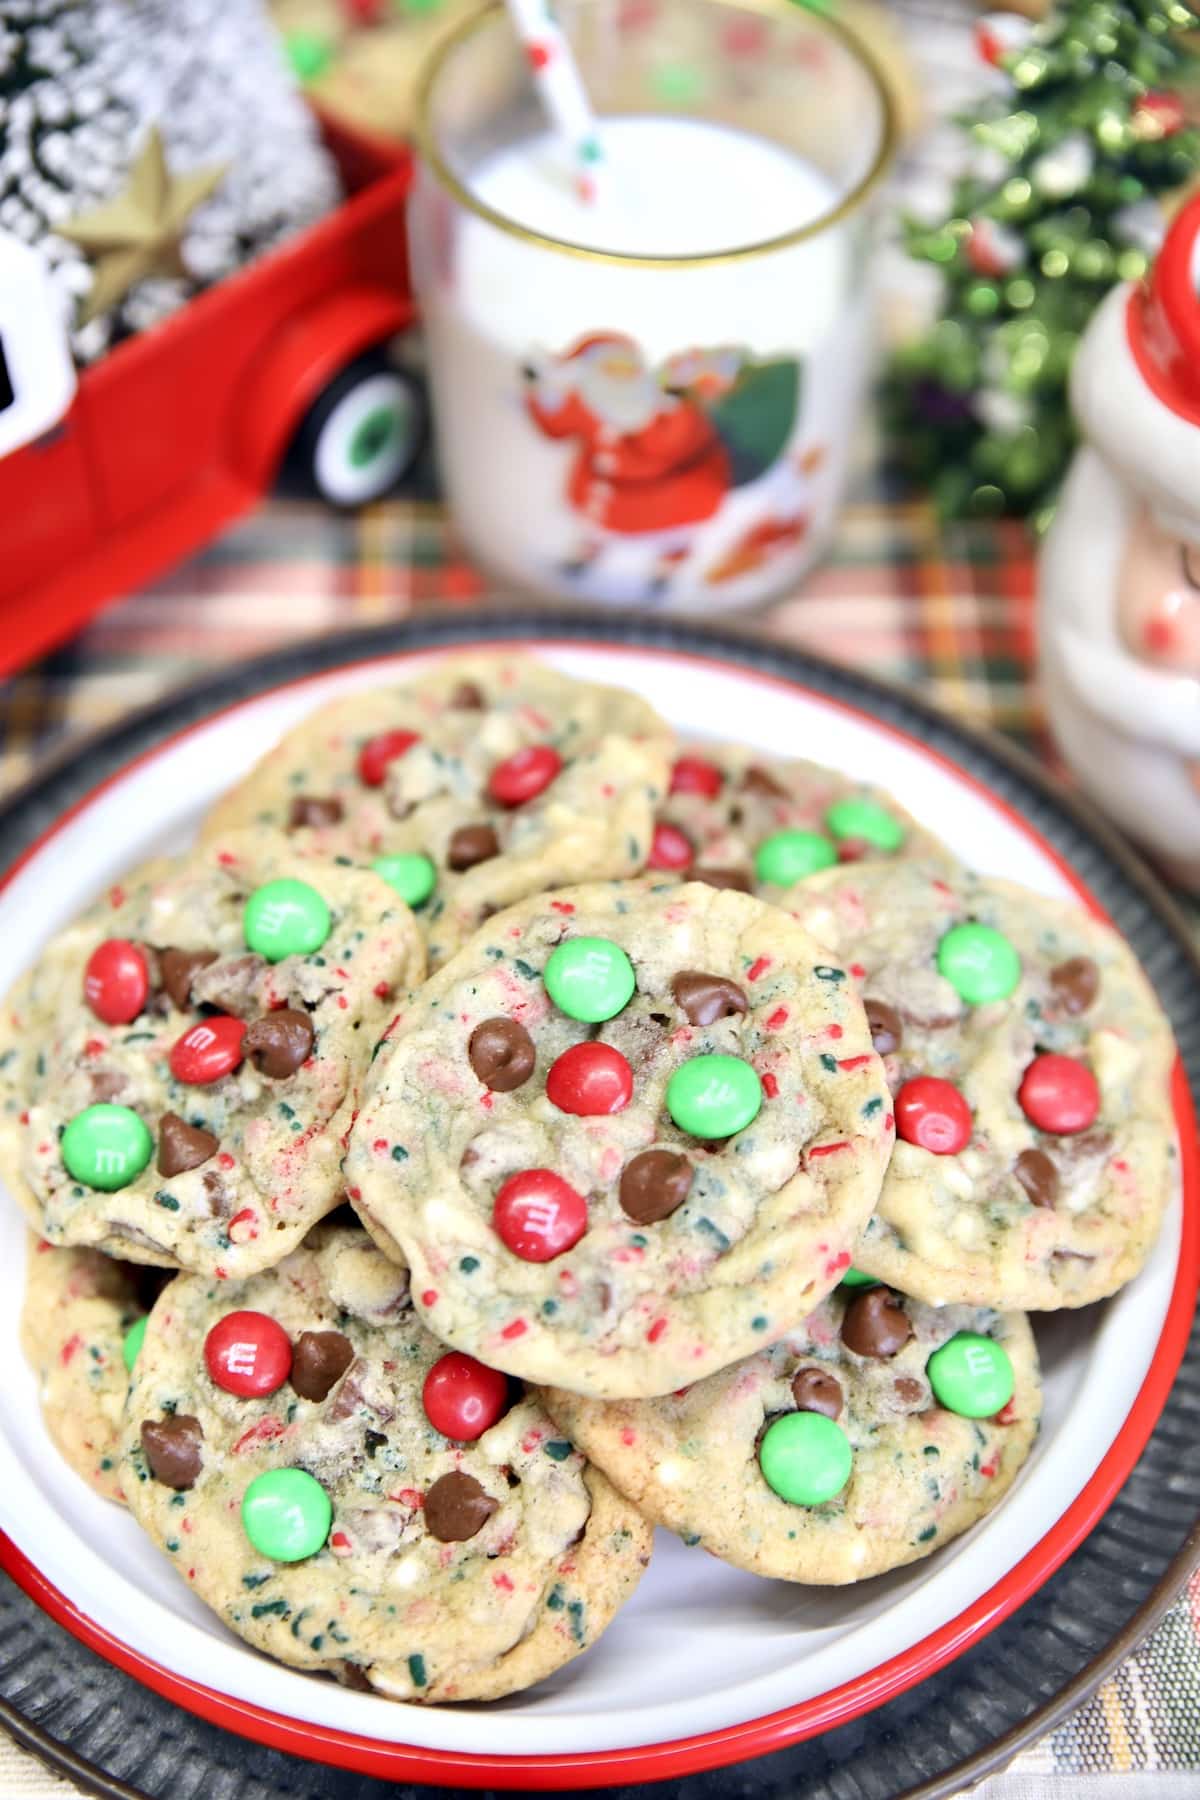 Platter of cookies with m&ms, Christmas decor, glass of milk.